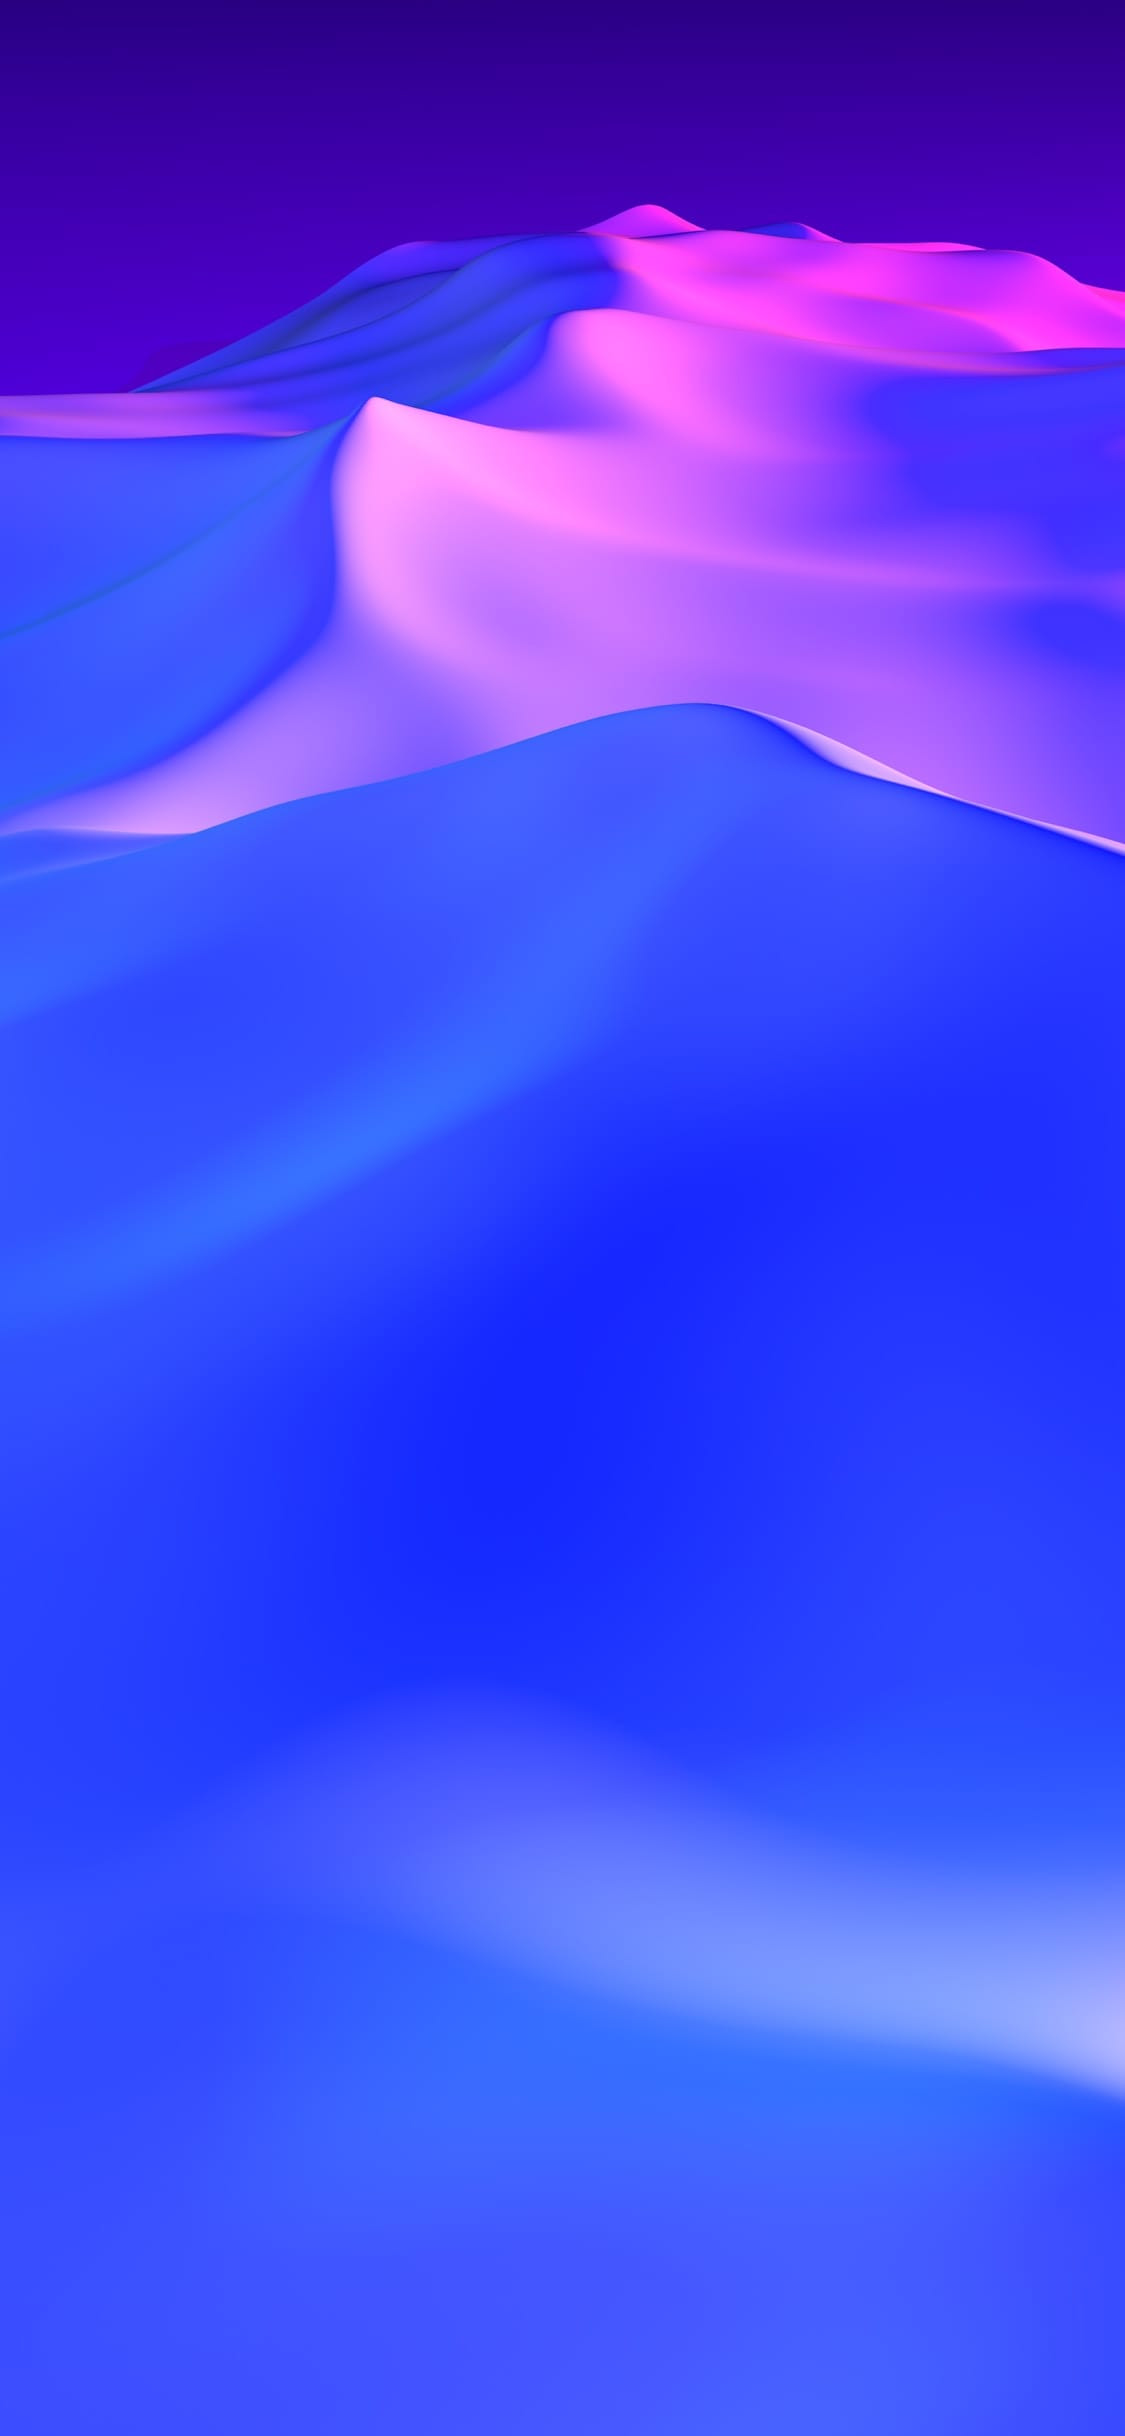 Liquid wallpapers for iPhone